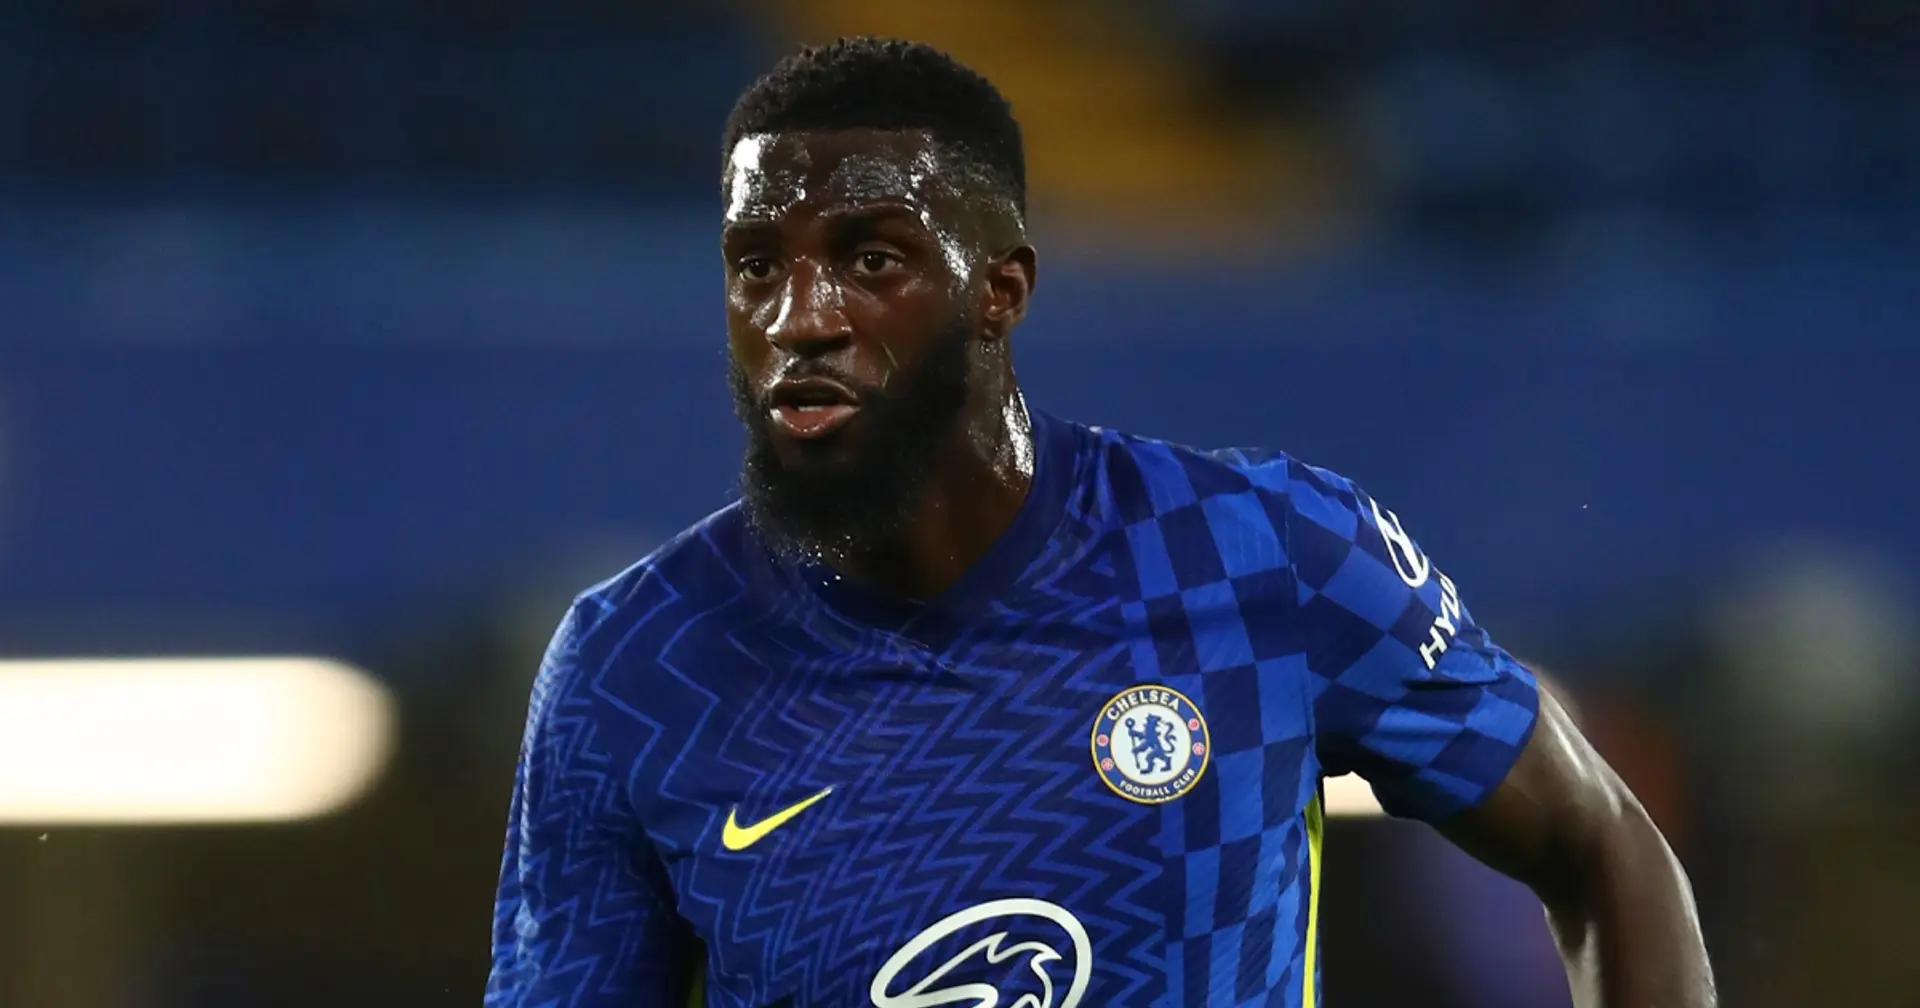 Tiemoue Bakayoko undergoes AC Milan medical, will extend Chelsea contract before leaving on loan (reliability: 5 stars)